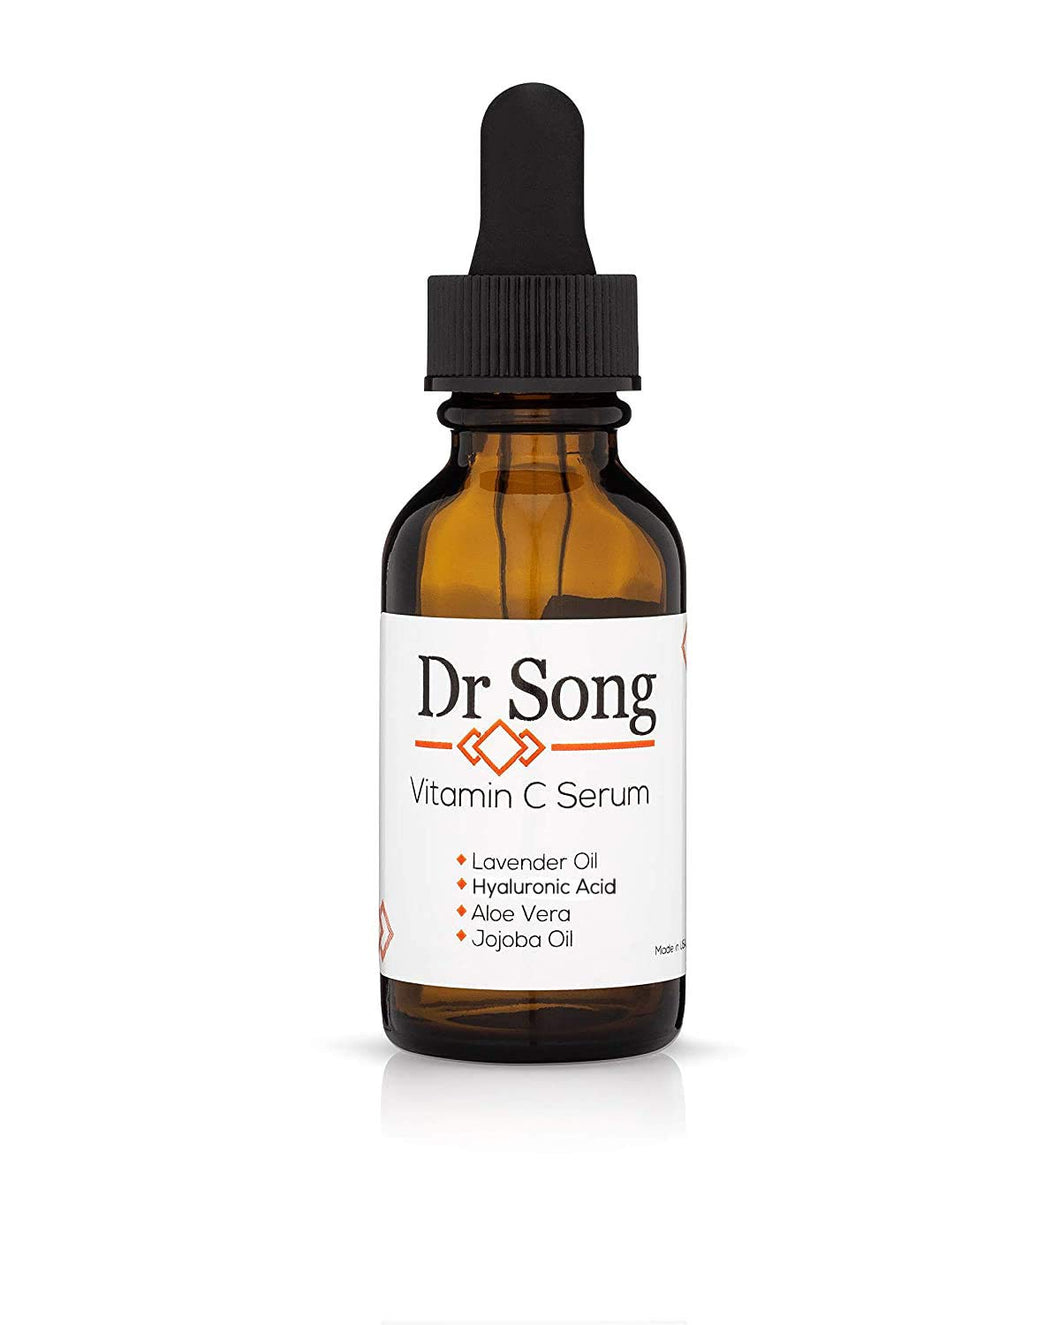 Dr Song Vitamin C with Hyaluronic Acid, Vitamin E, Witch Hazel, Lavender Oil, Rose Water, Jojoba Oil, and Aloe Vera, Anti-Aging Skin Care with Antioxidants, Facial Moisturizer